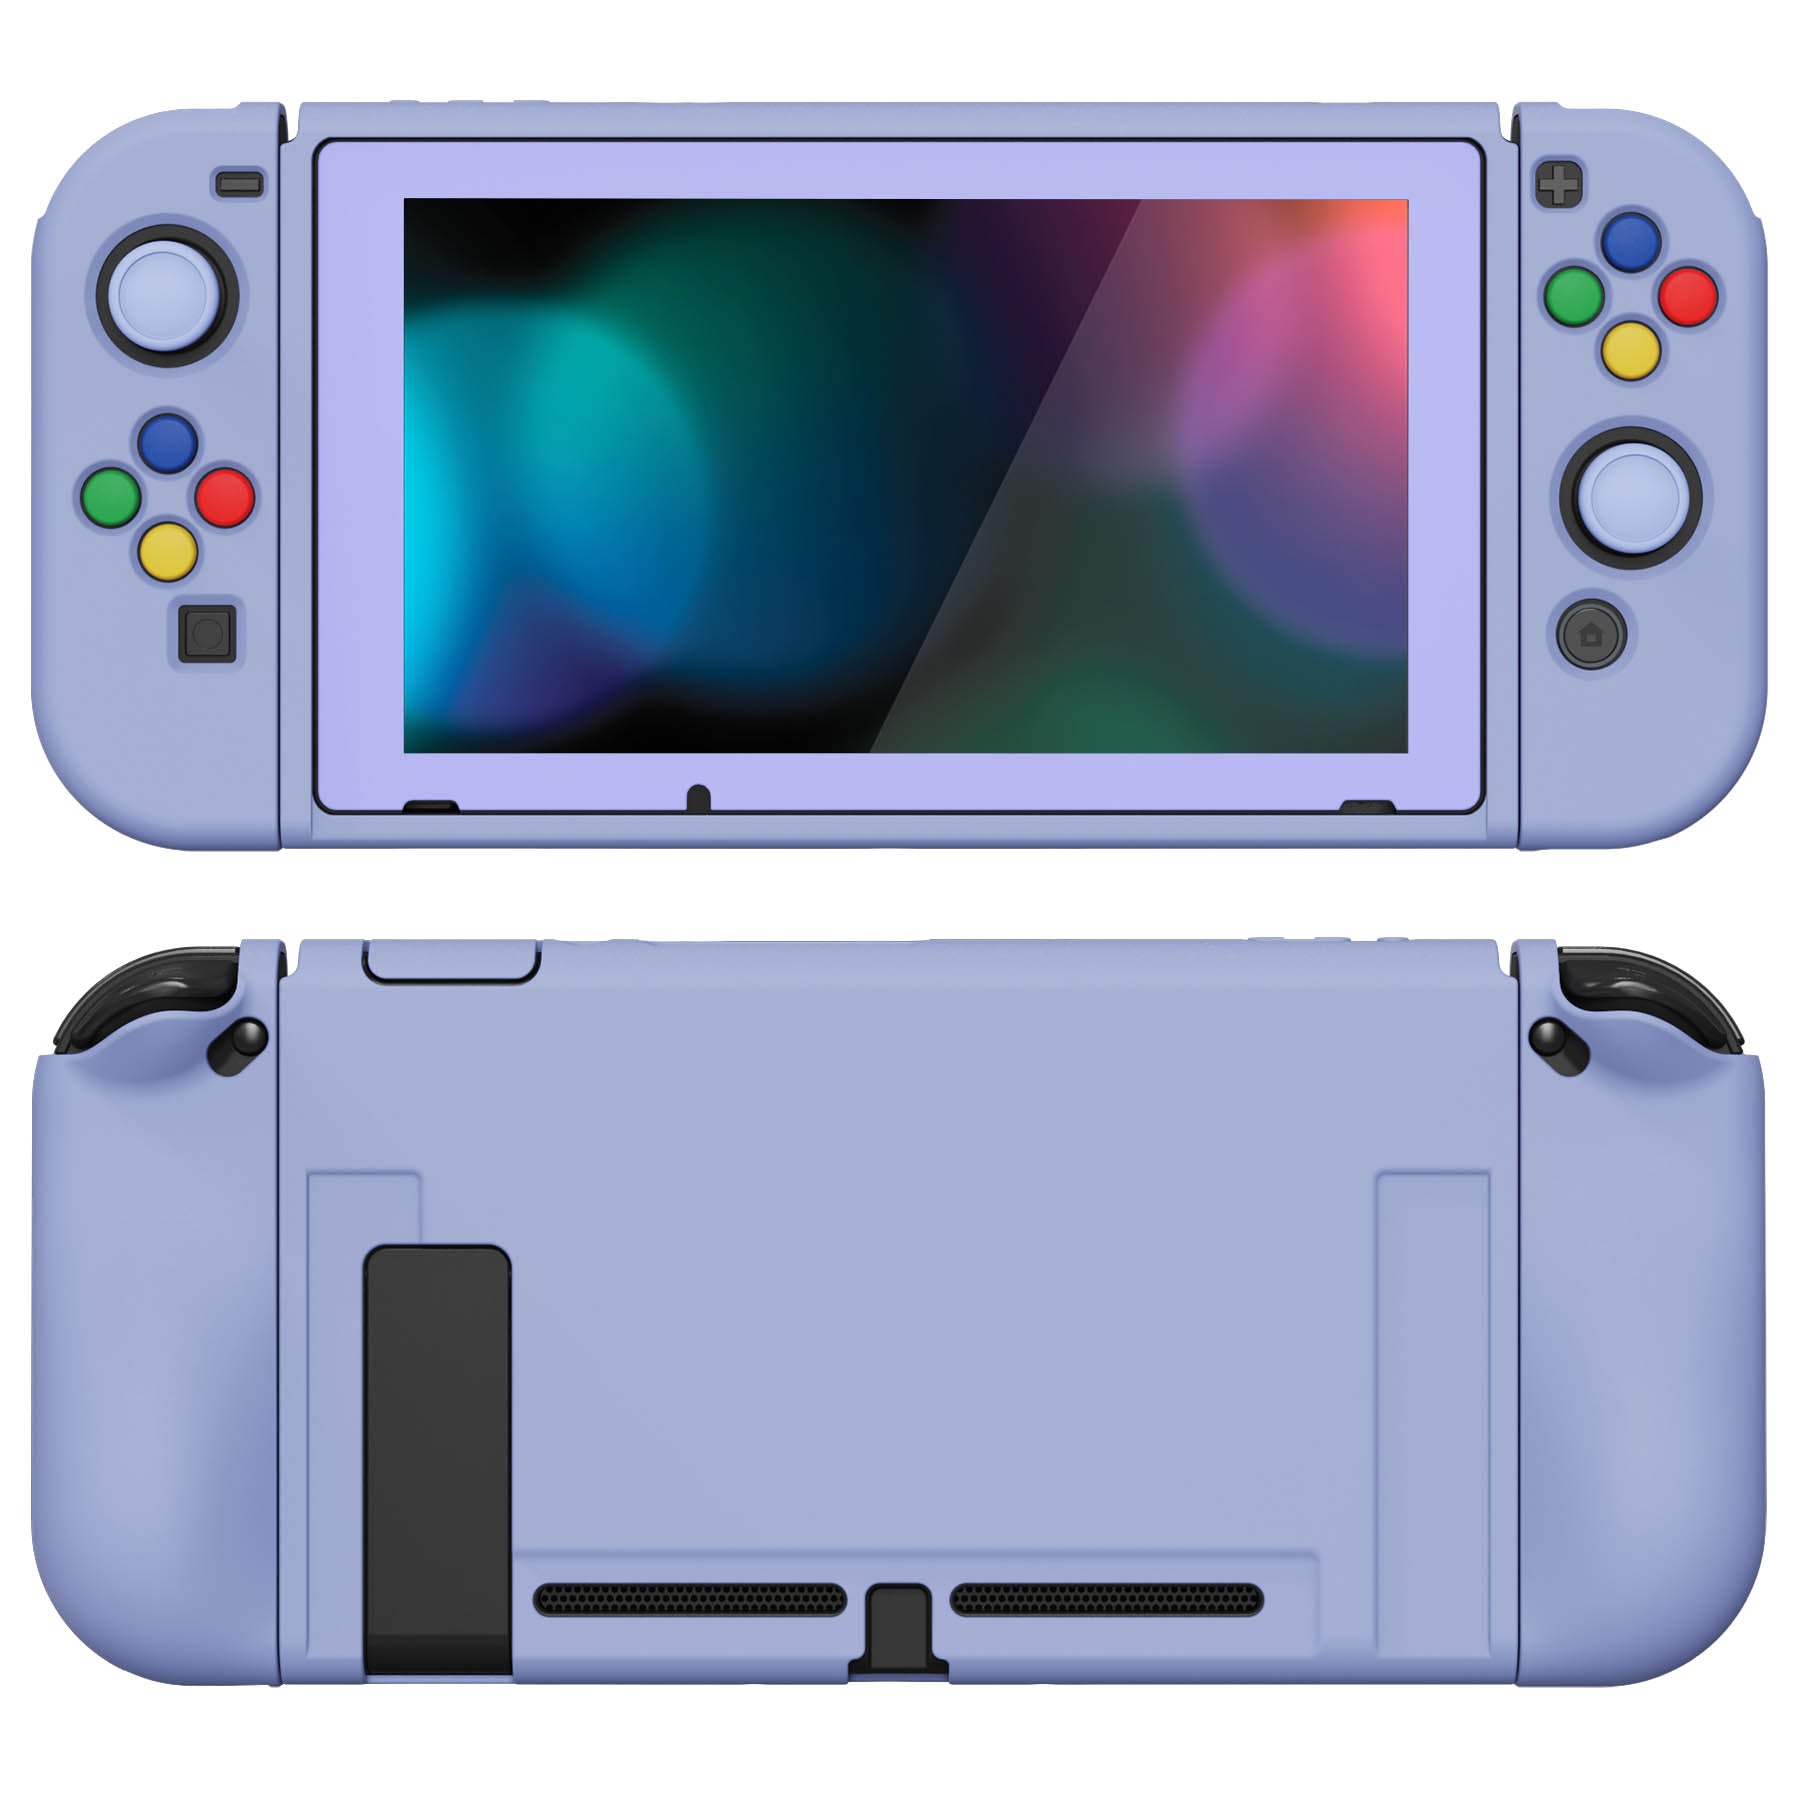 PlayVital ZealProtect Soft Protective Case for Nintendo Switch, Flexible Cover for Switch with Tempered Glass Screen Protector & Thumb Grips & ABXY Direction Button Caps - Light Violet - RNSYM5003 playvital